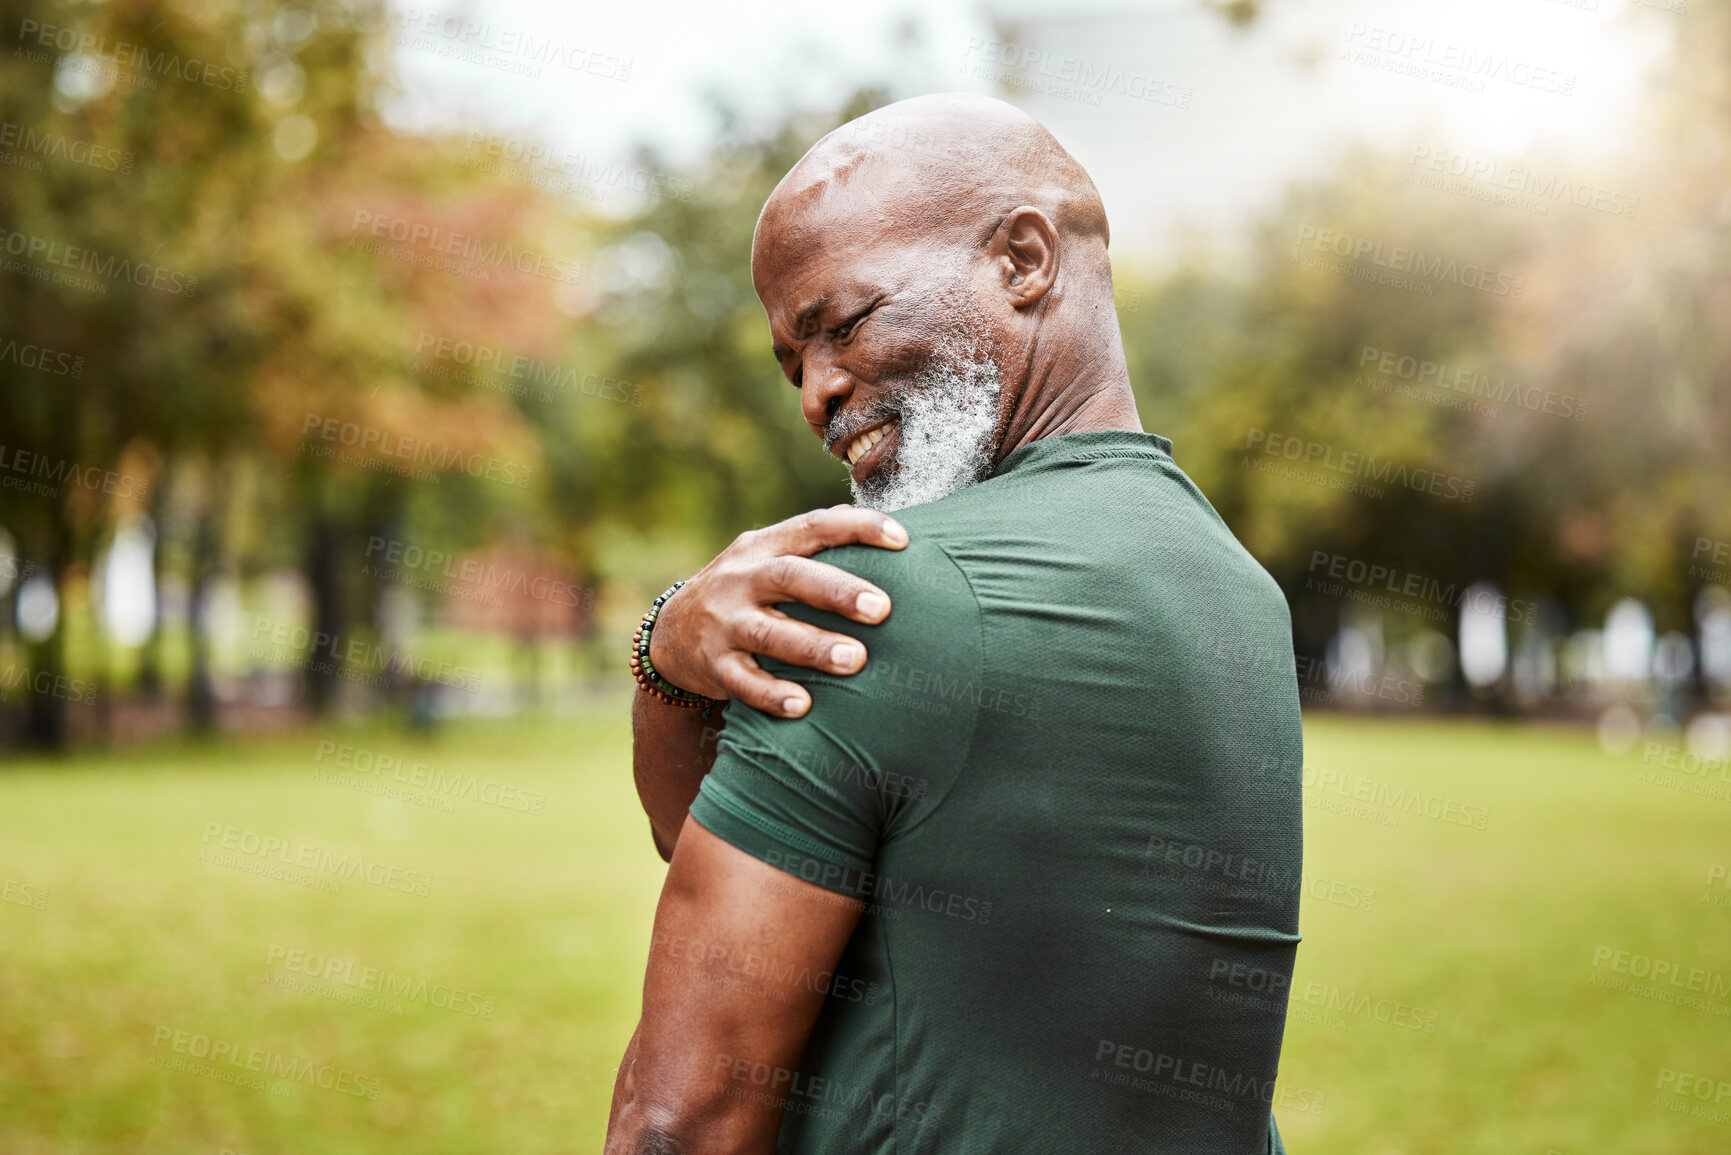 Buy stock photo Senior black man with shoulder pain, fitness injury and exercise in the park with muscle ache or inflammation outdoor. Health, accident during workout and hurt, elderly person with pain from sport.